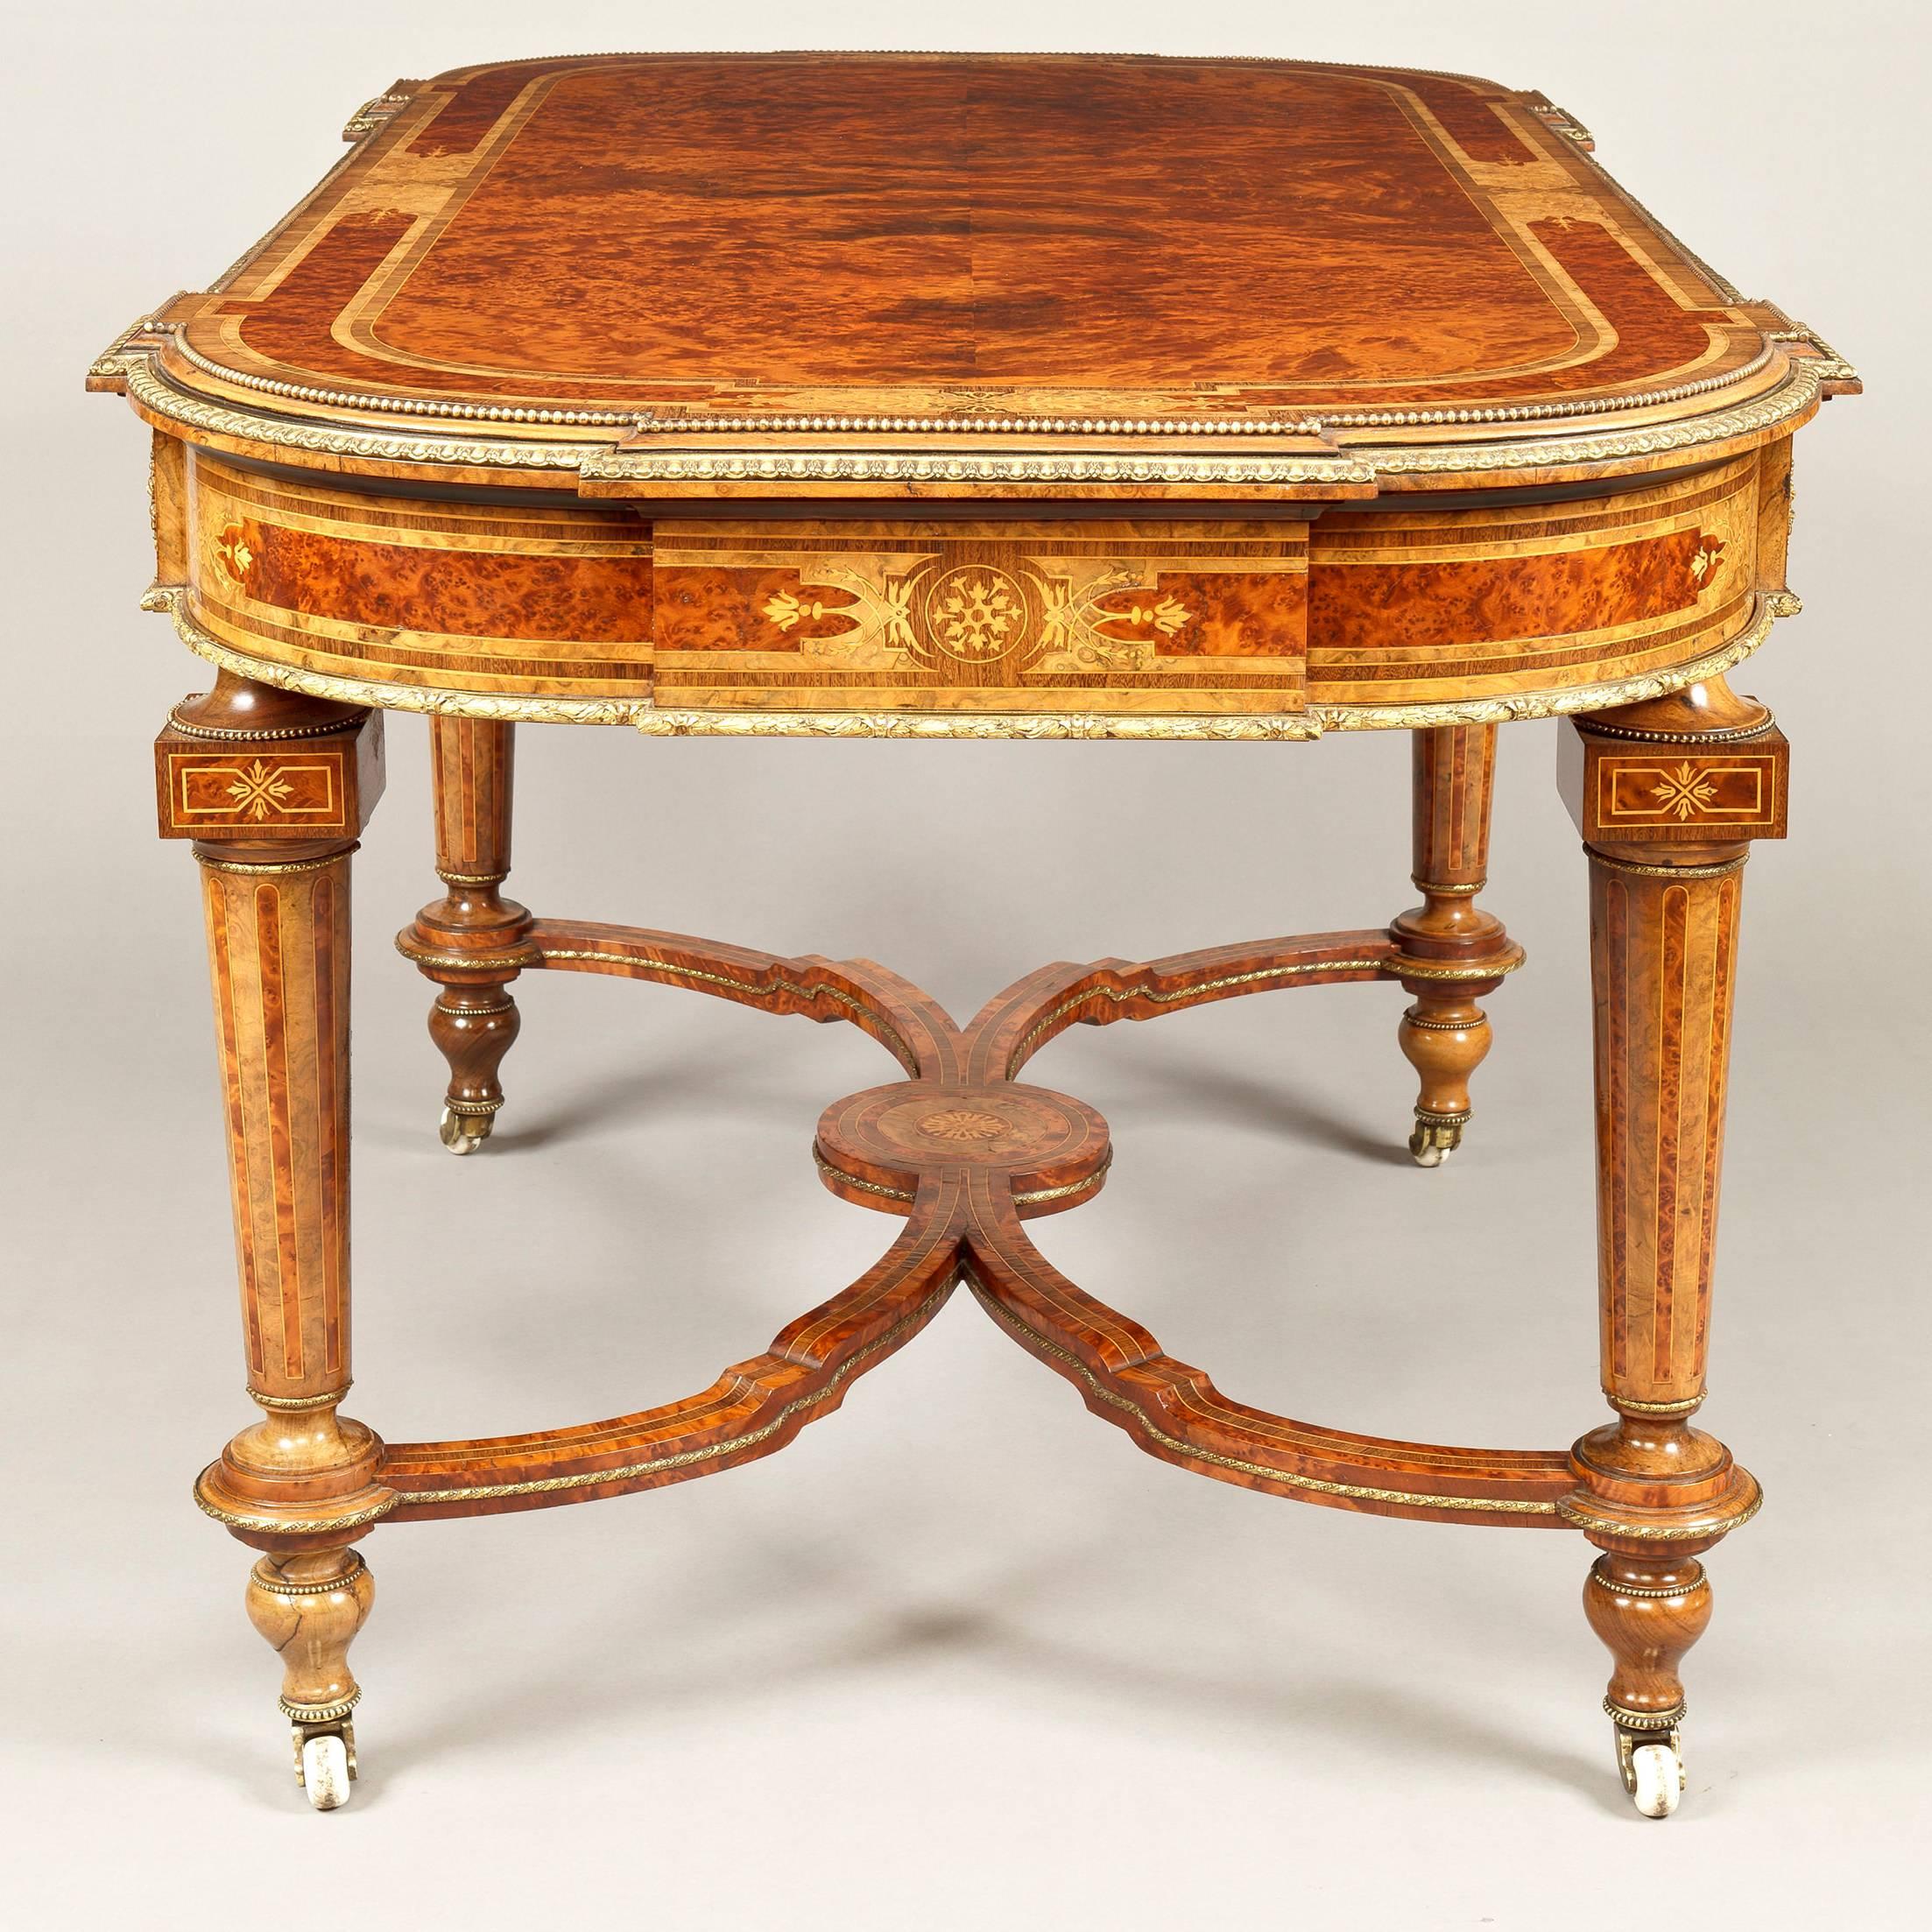 A very fine and substantial centre table in the Louis XVI in the Manner of Holland & Sons

Of exceptional quality, utilising beautifully grained woods, including Circassian walnut, thuya, purple heart and boxwood in the construction, and adorned